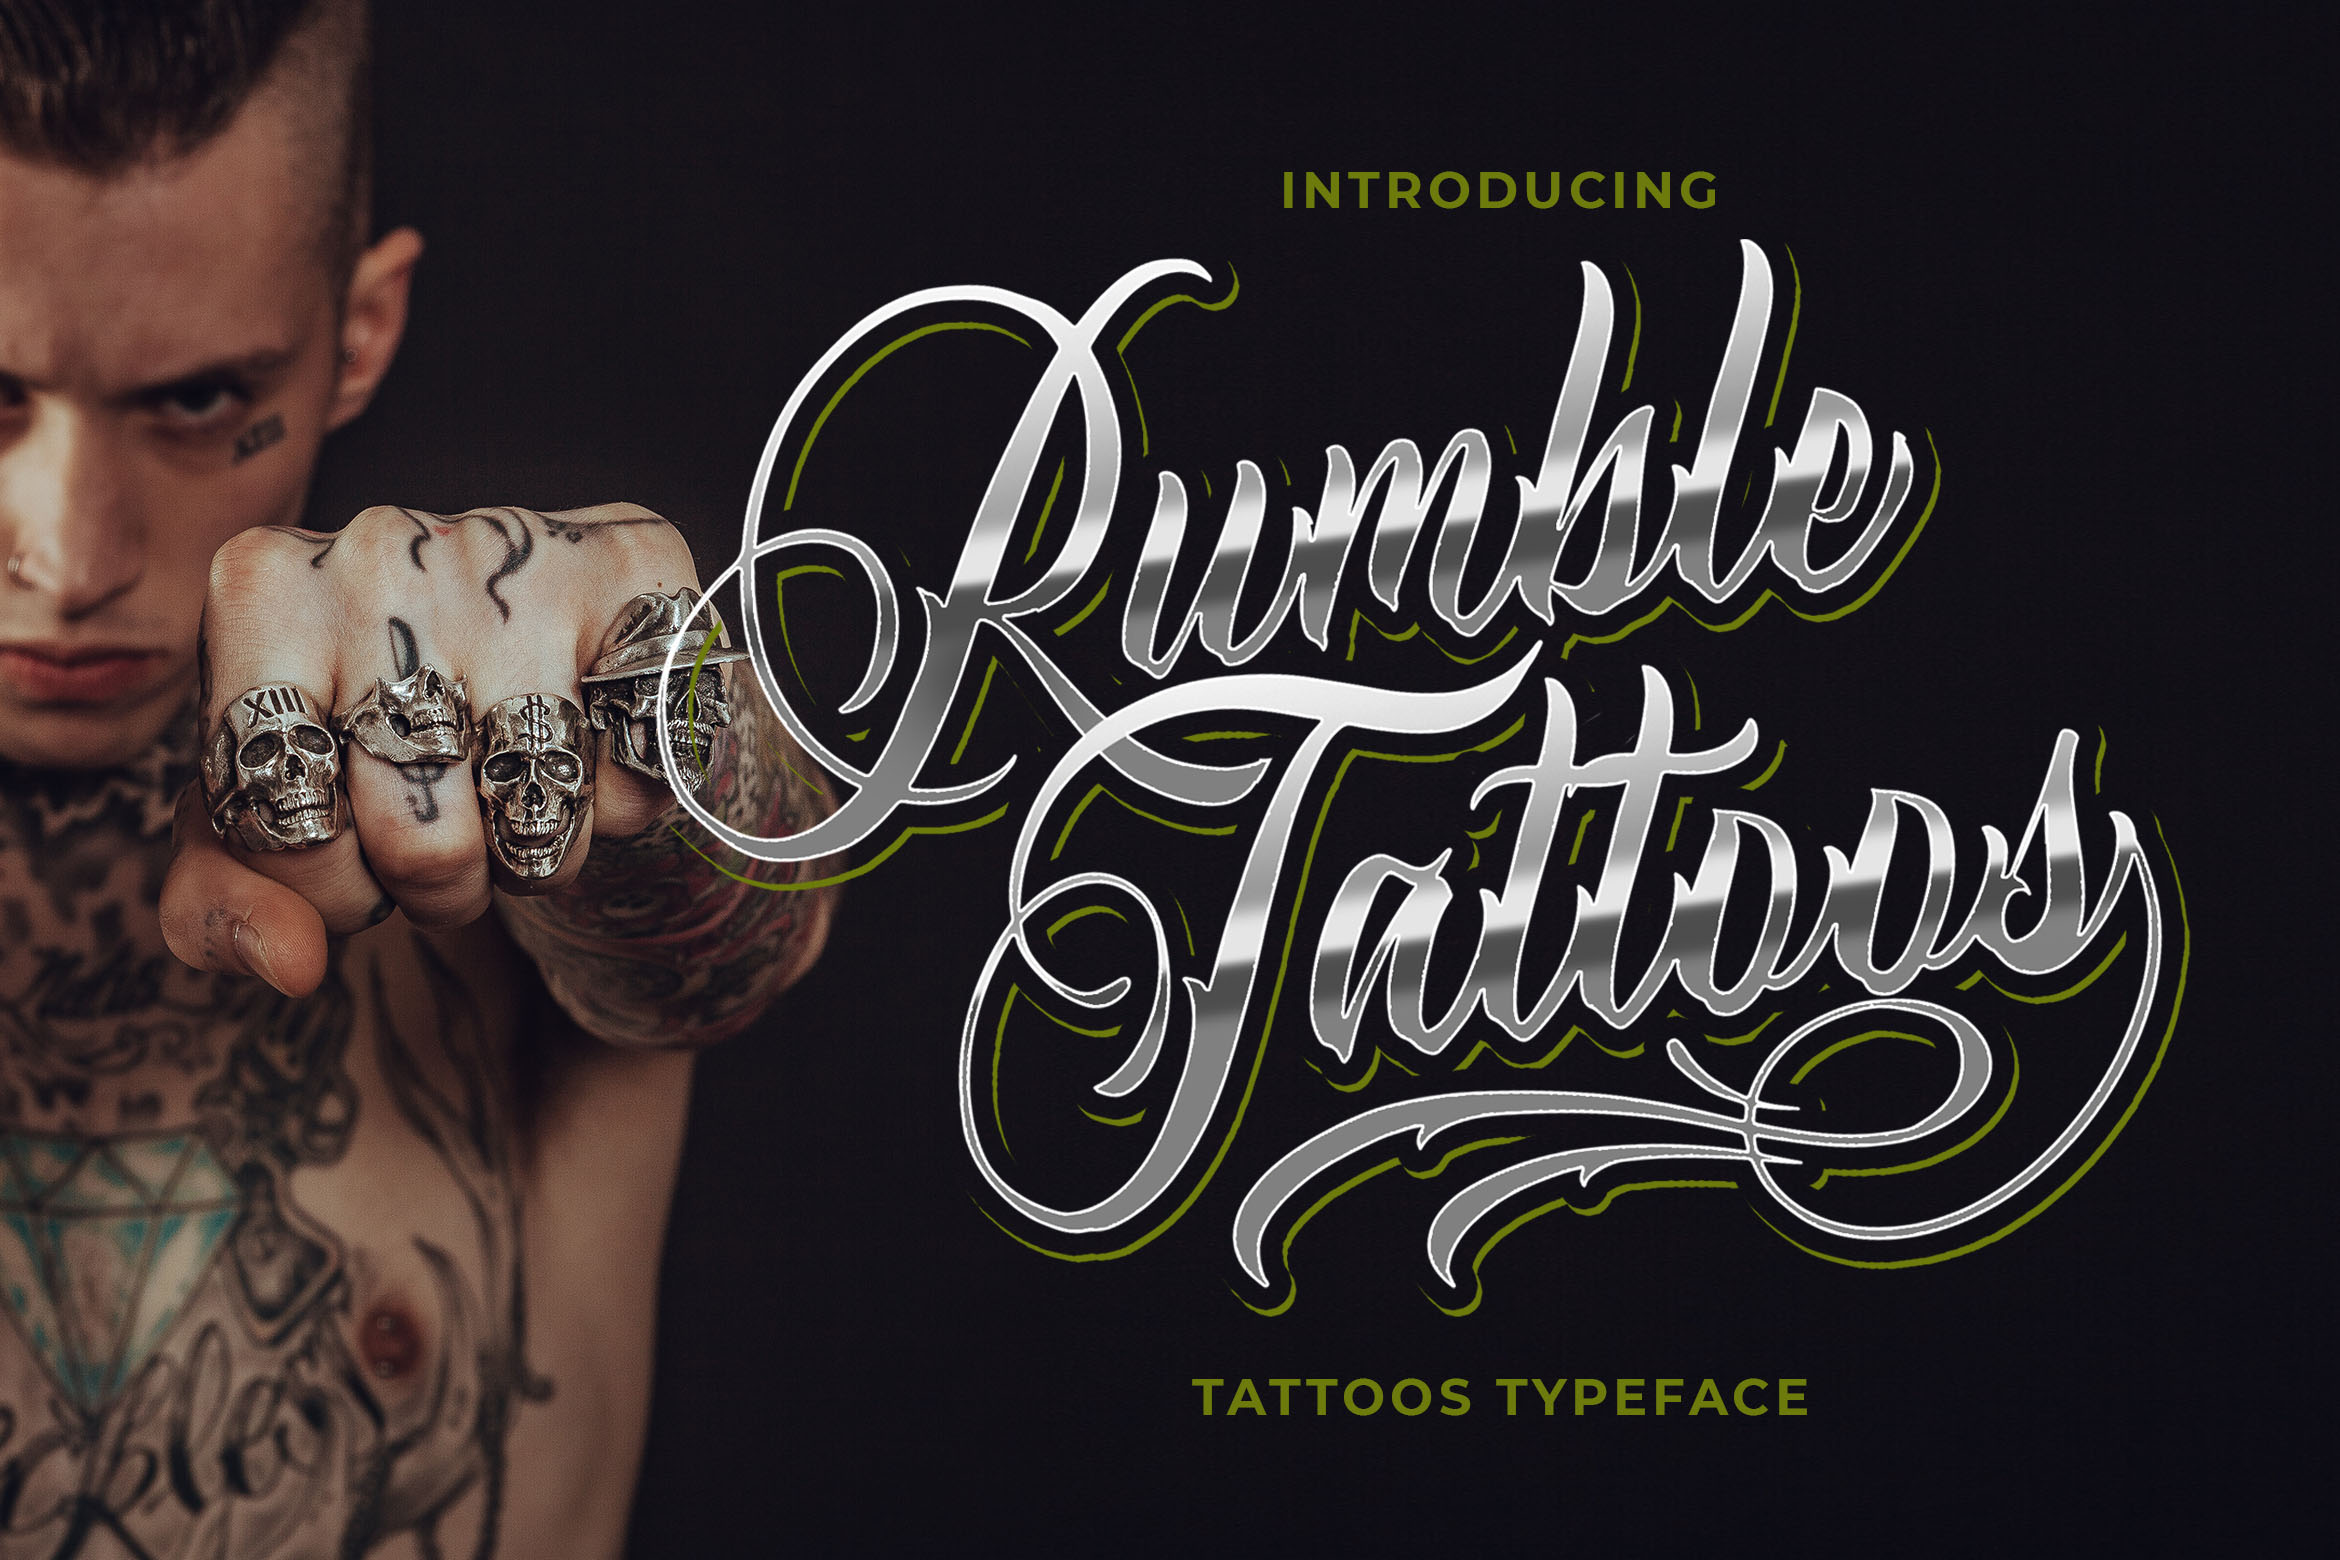 Rumble Tattoos: download for free and install for your website or Photoshop.